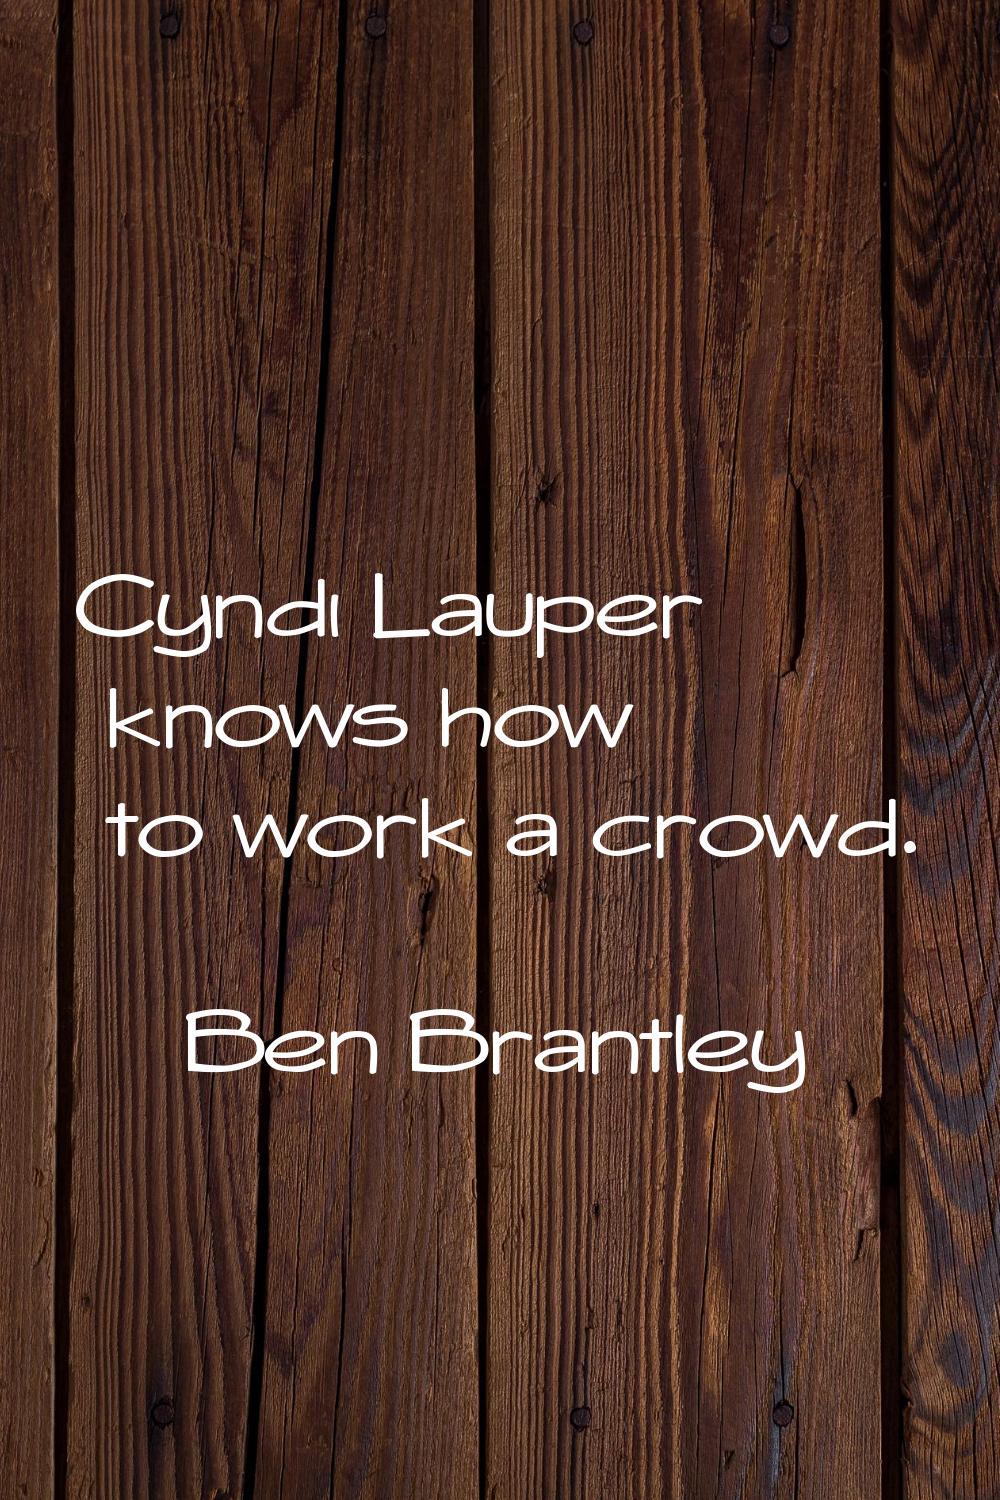 Cyndi Lauper knows how to work a crowd.